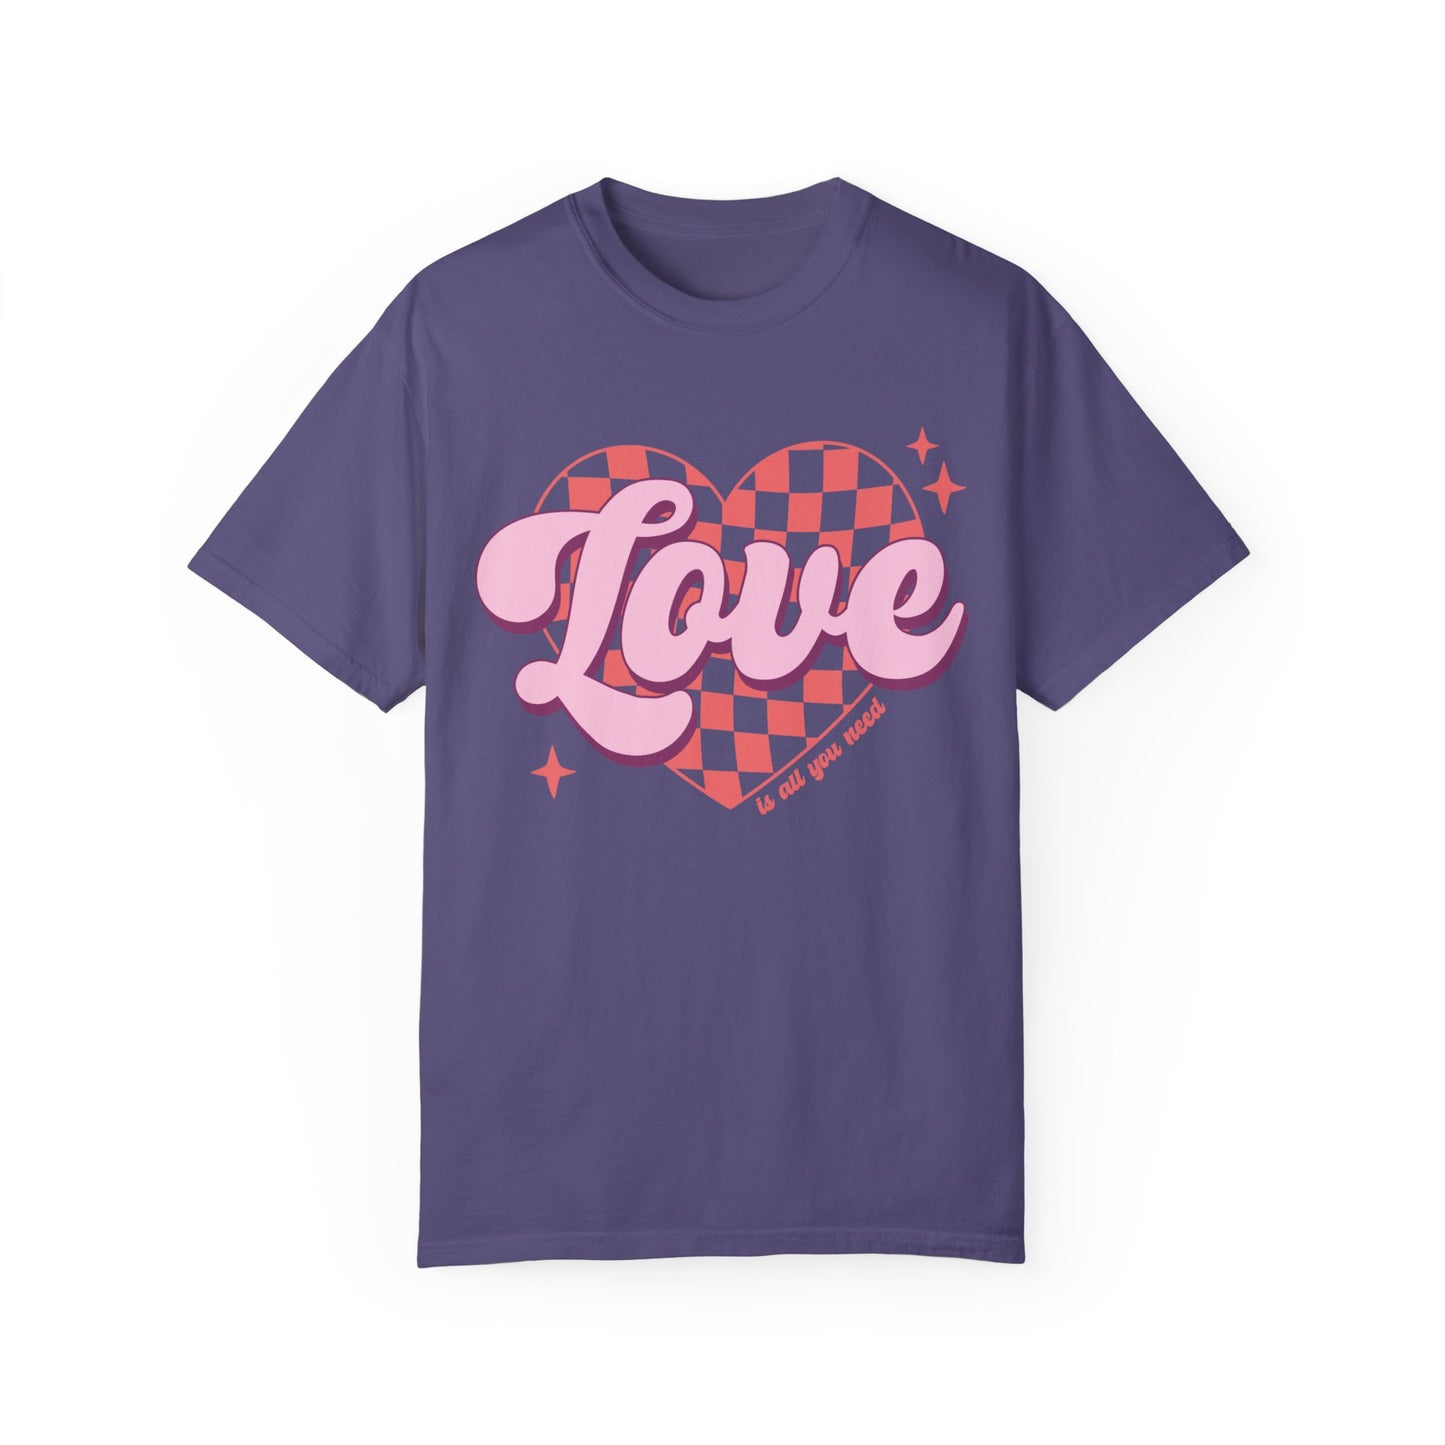 Love Is All You Need Shirt